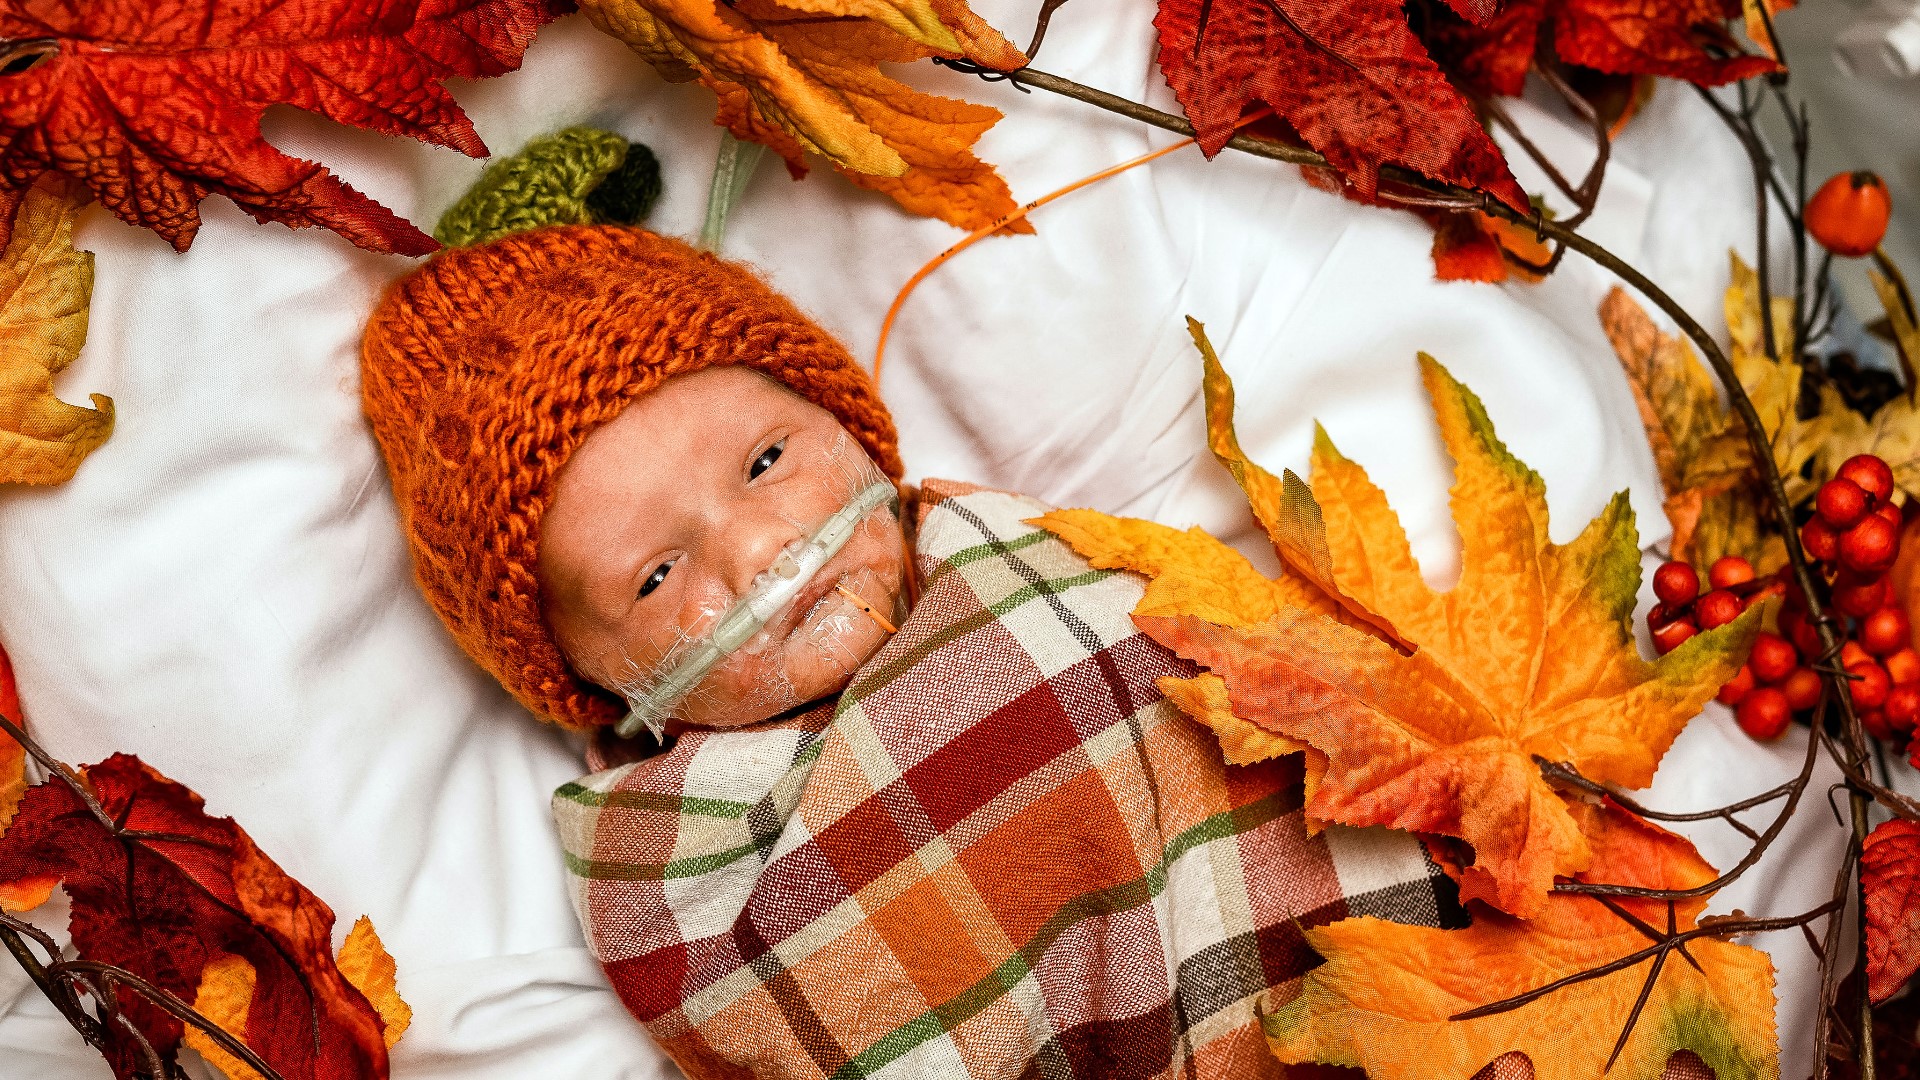 A former NICU mom treated babies at Baptist Health Louisville to a Thanksgiving-themed photo shoot with leaves, pumpkins, and plaid.